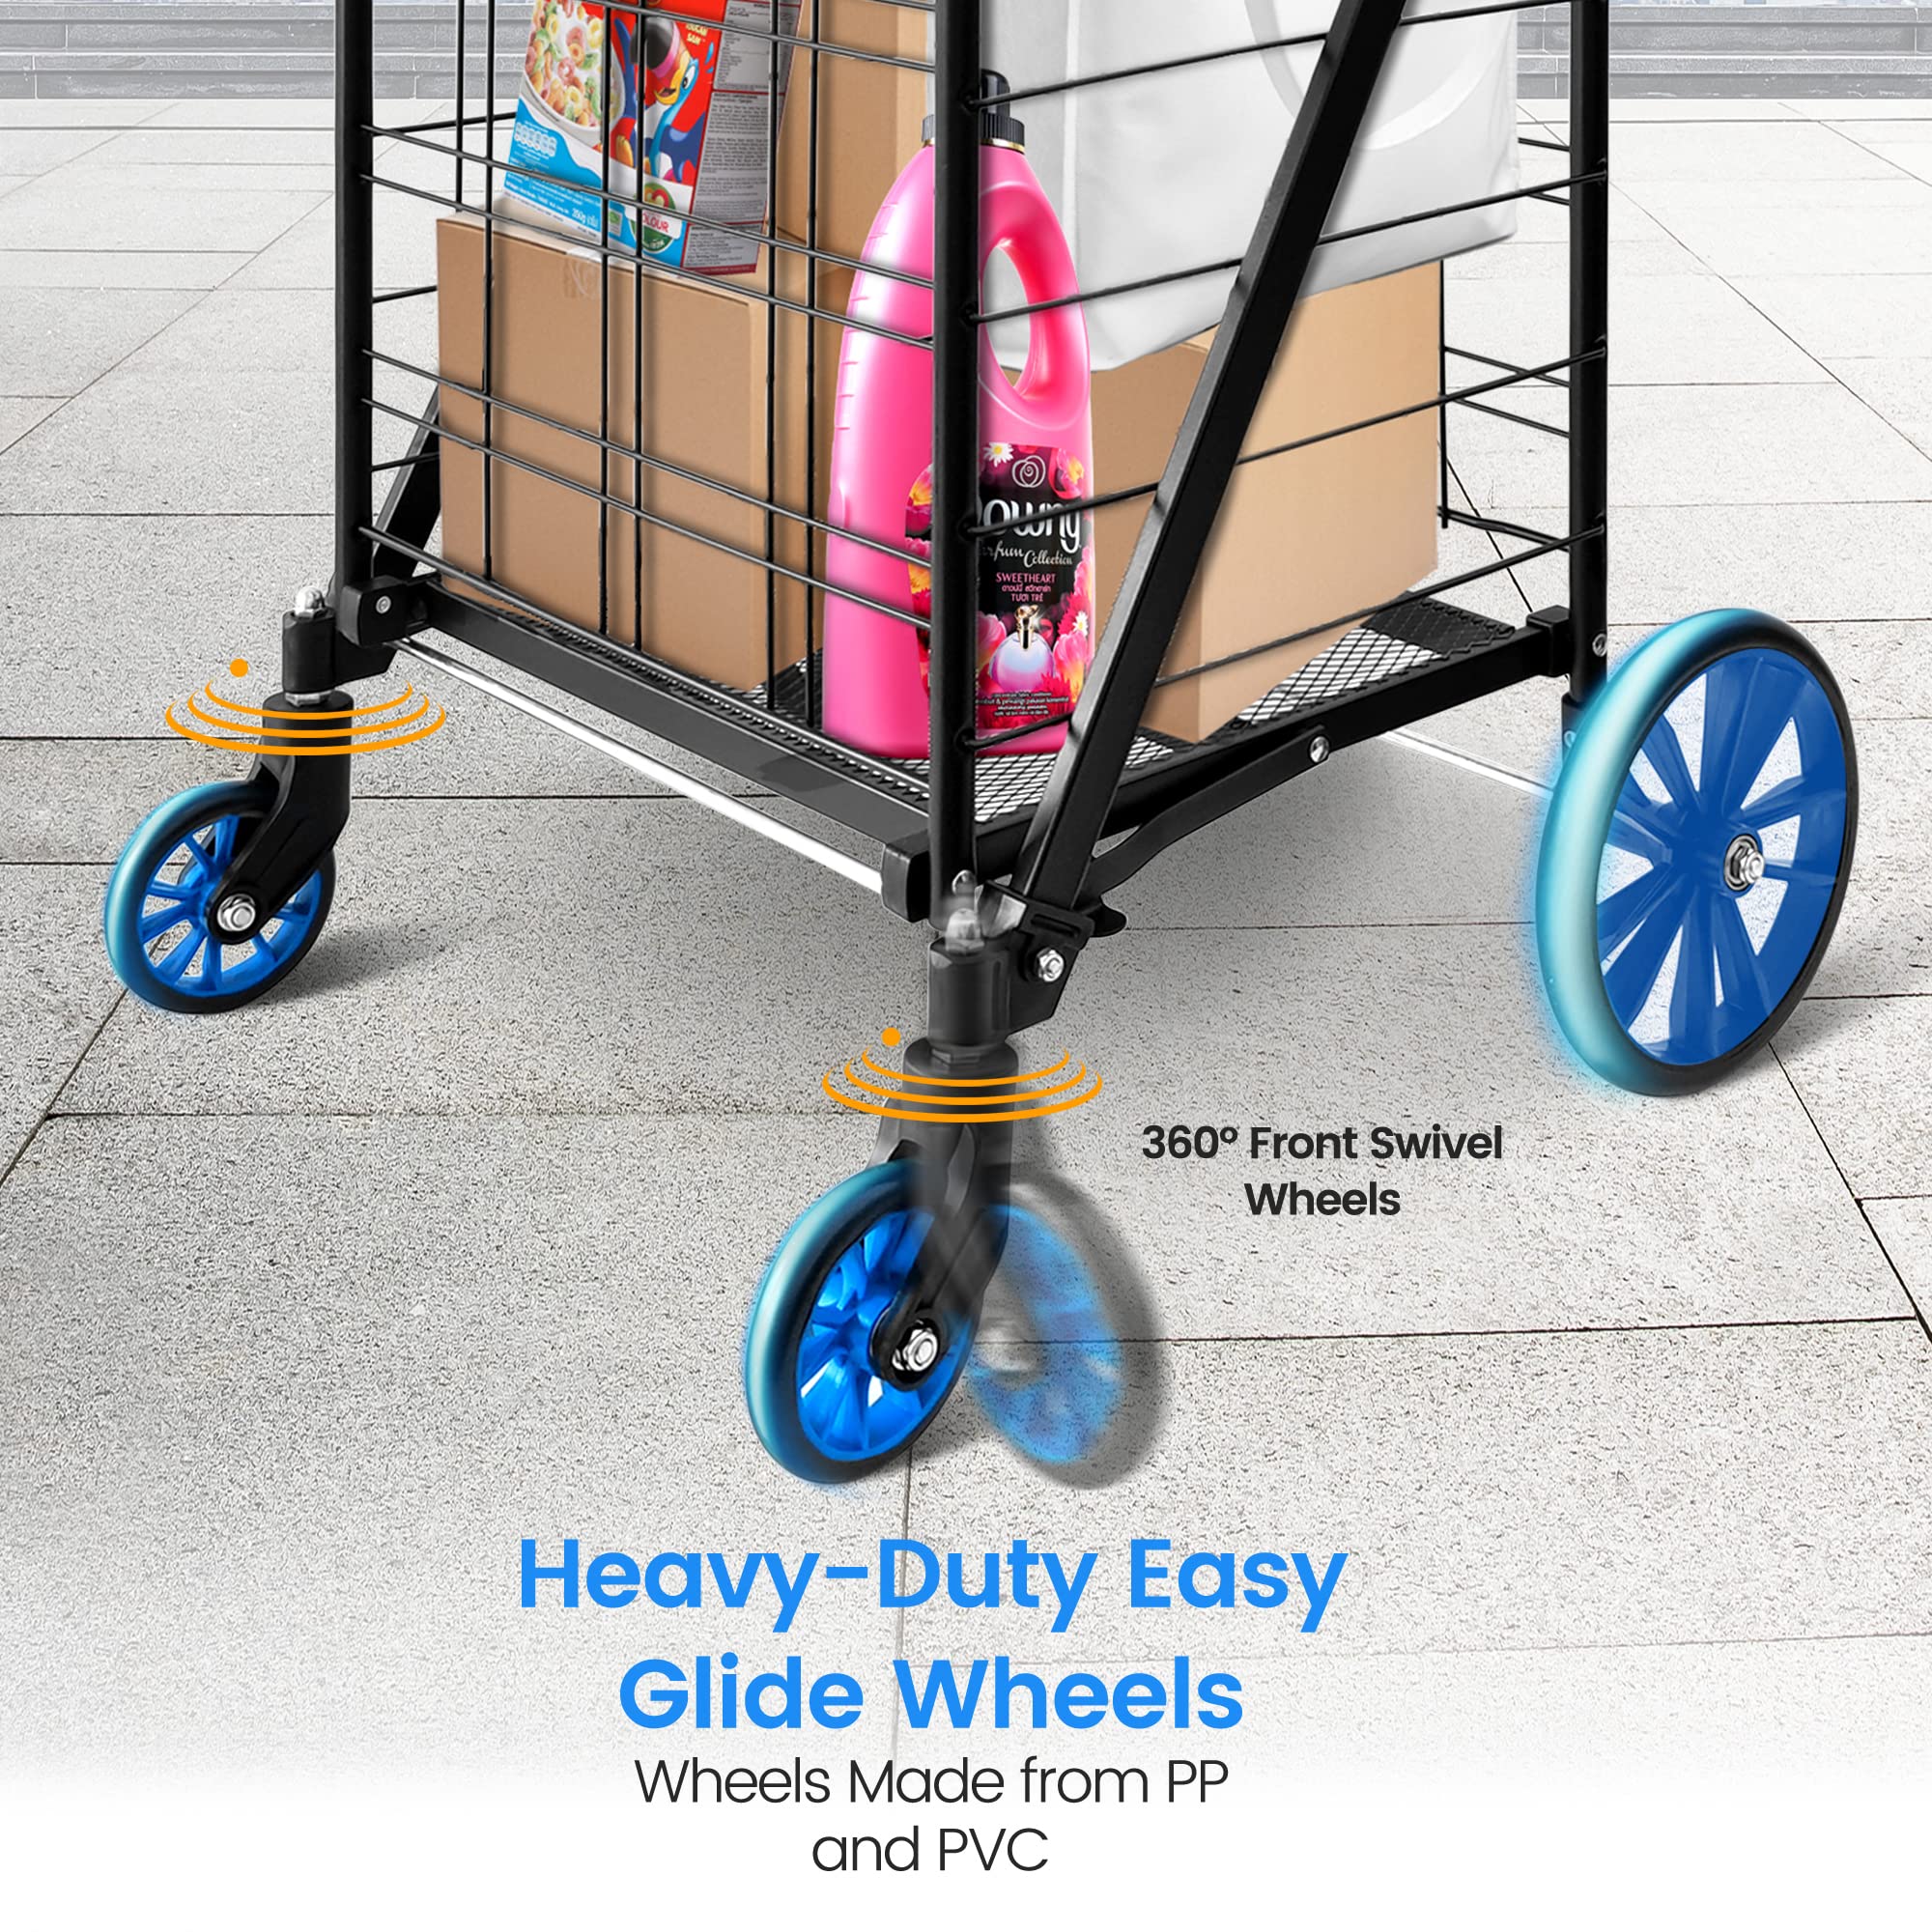 SereneLife Shopping Supermarket Cart with 360 Rolling Swivel Wheels, Collapsible Design, Double Basket Compartment, Heavy Duty Shopping Cart, Utility Cart for Grocery, Laundry, Luggage, Blue: